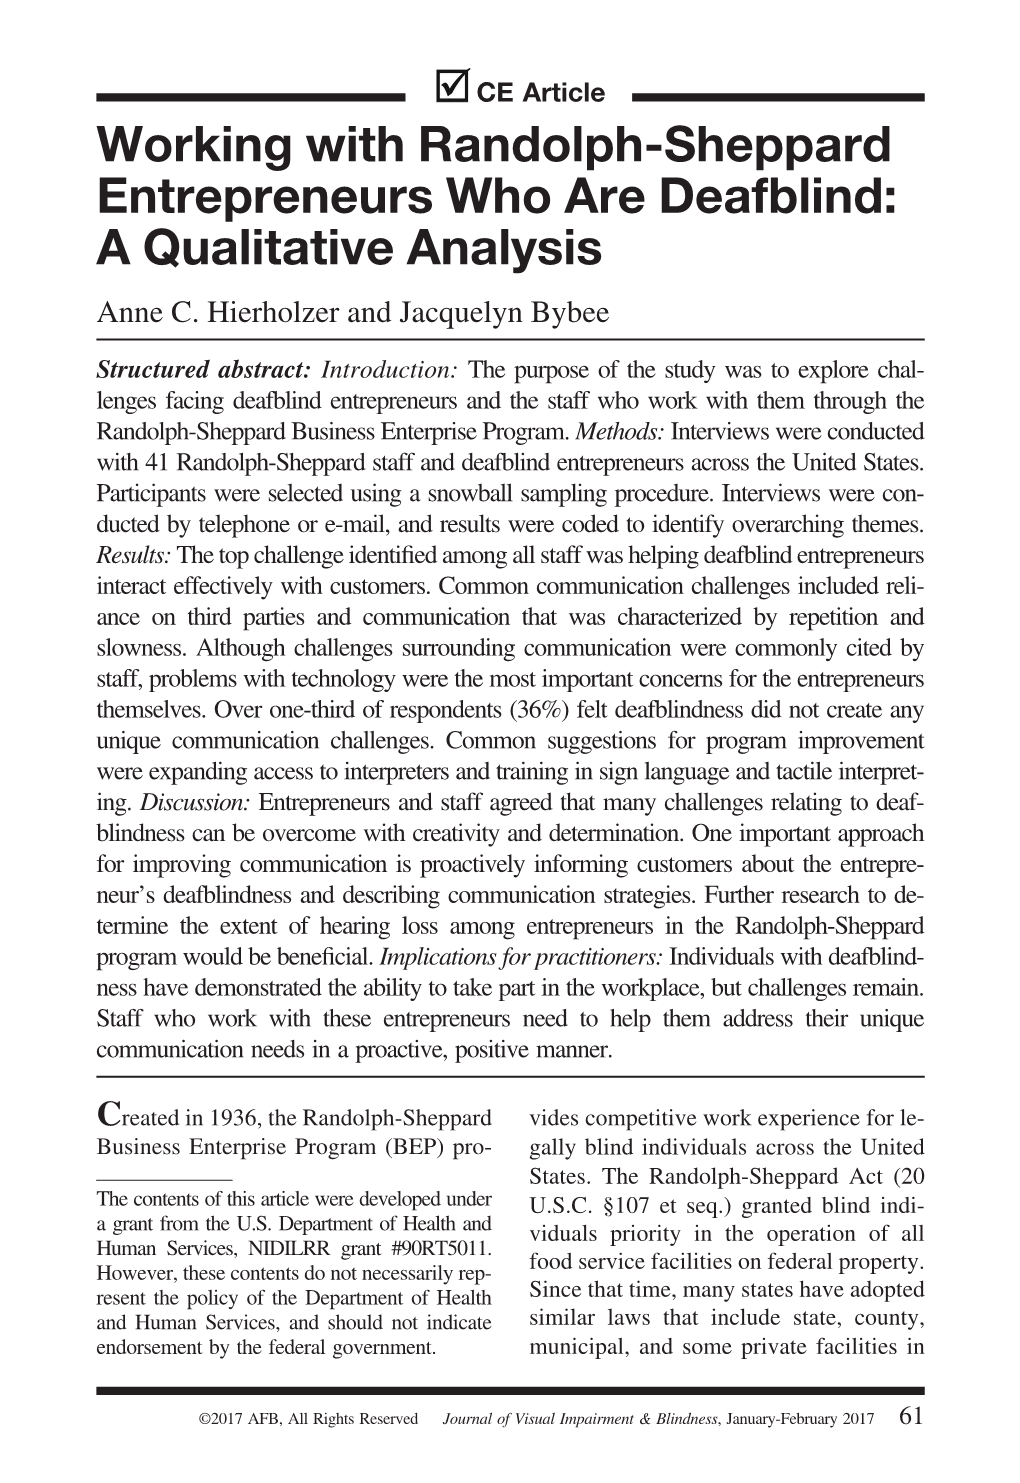 Working with Randolph-Sheppard Entrepreneurs Who Are Deafblind: a Qualitative Analysis Anne C